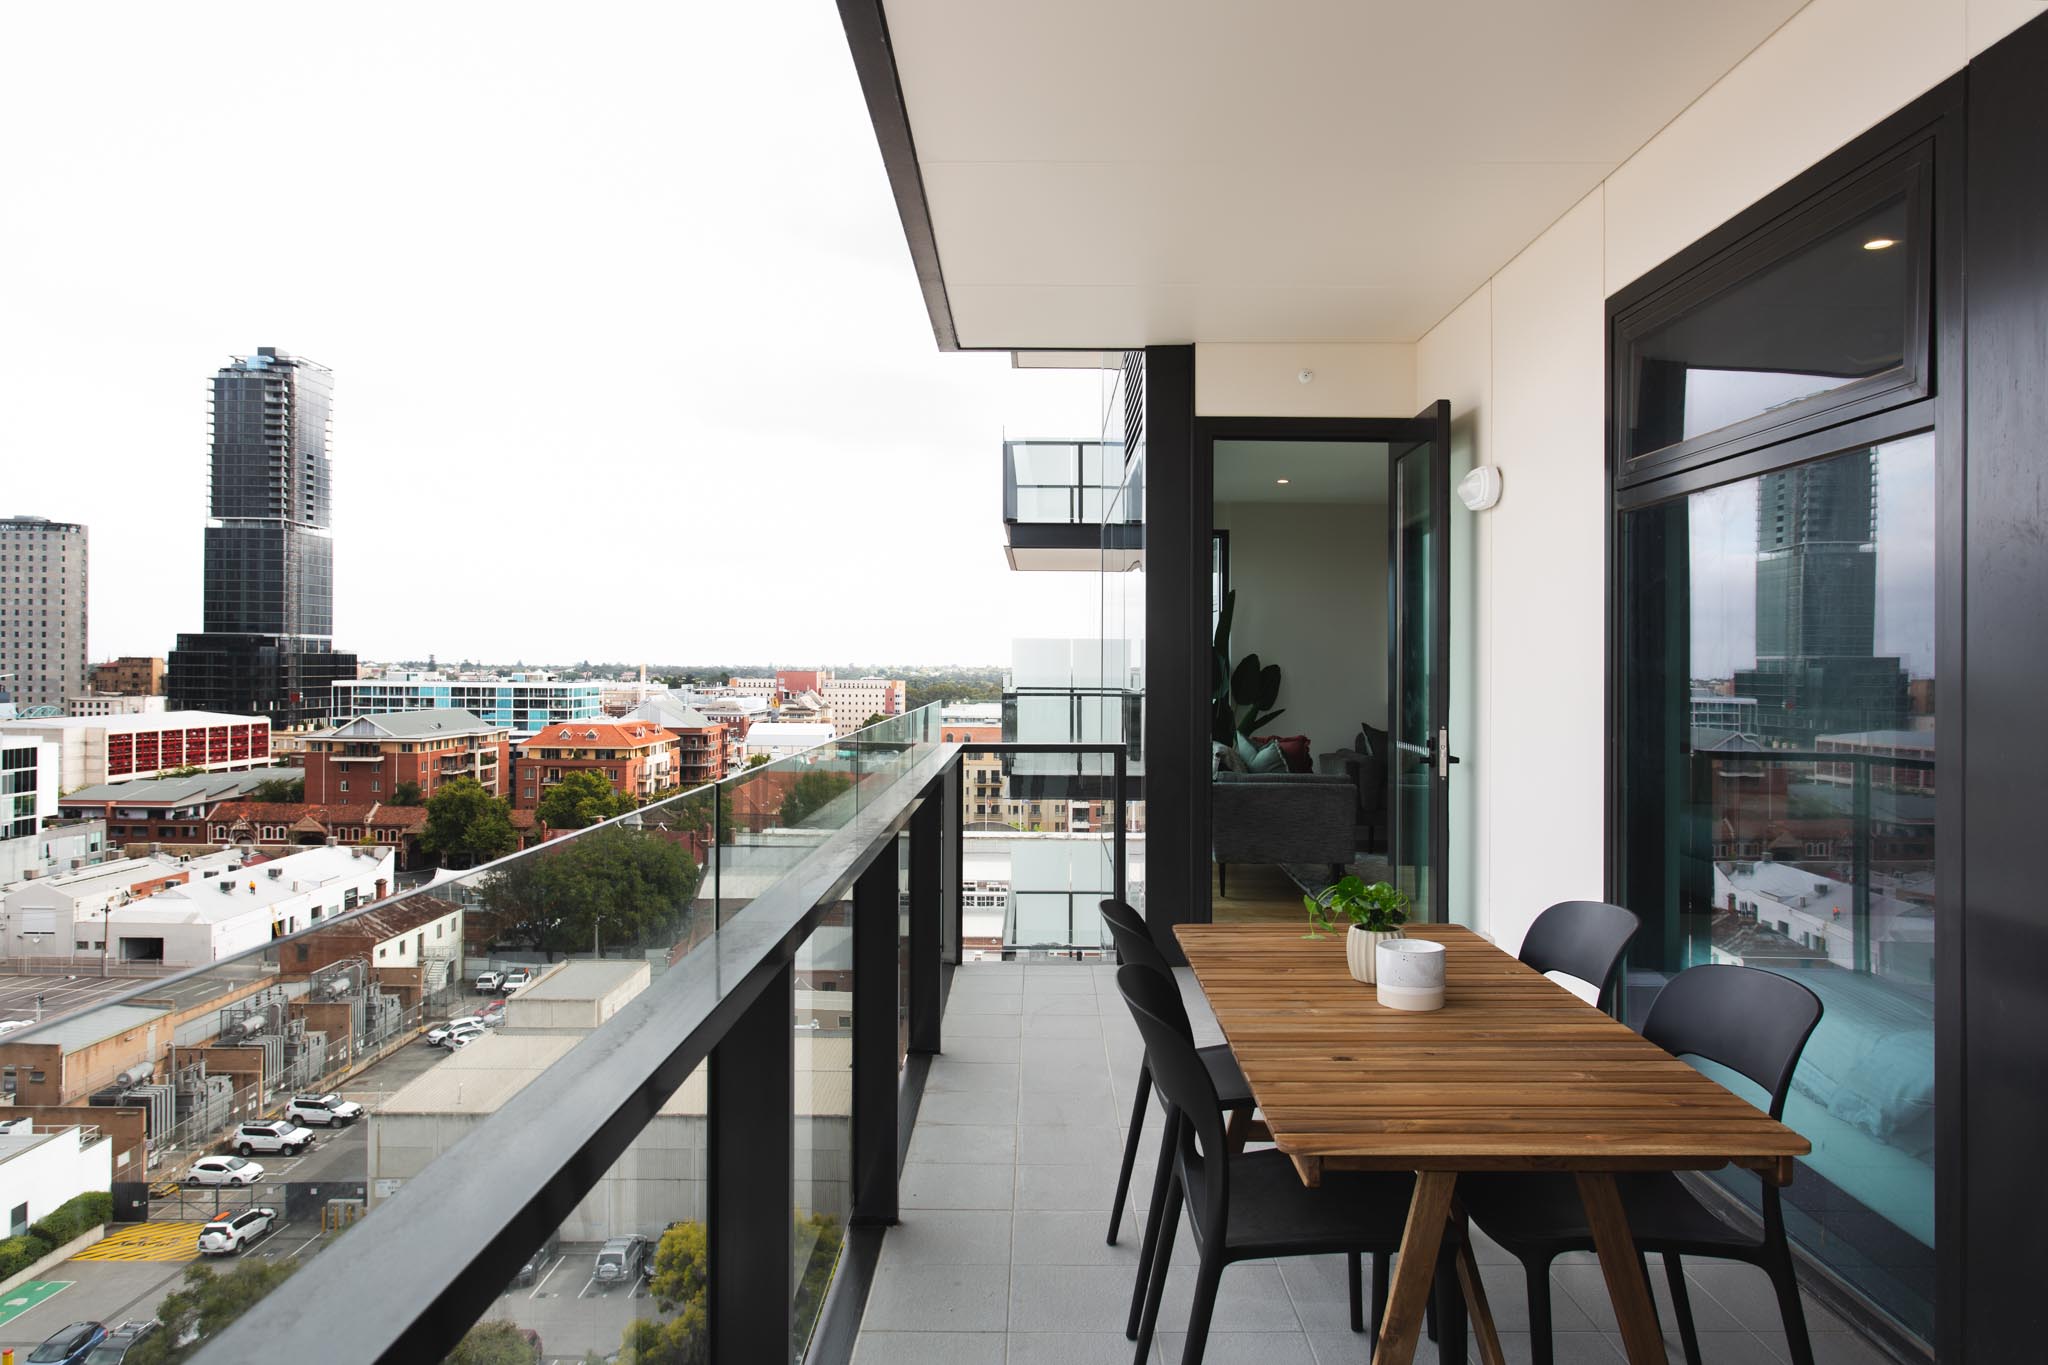 Balcony - East End Apartments - Adelaide - Urban Rest